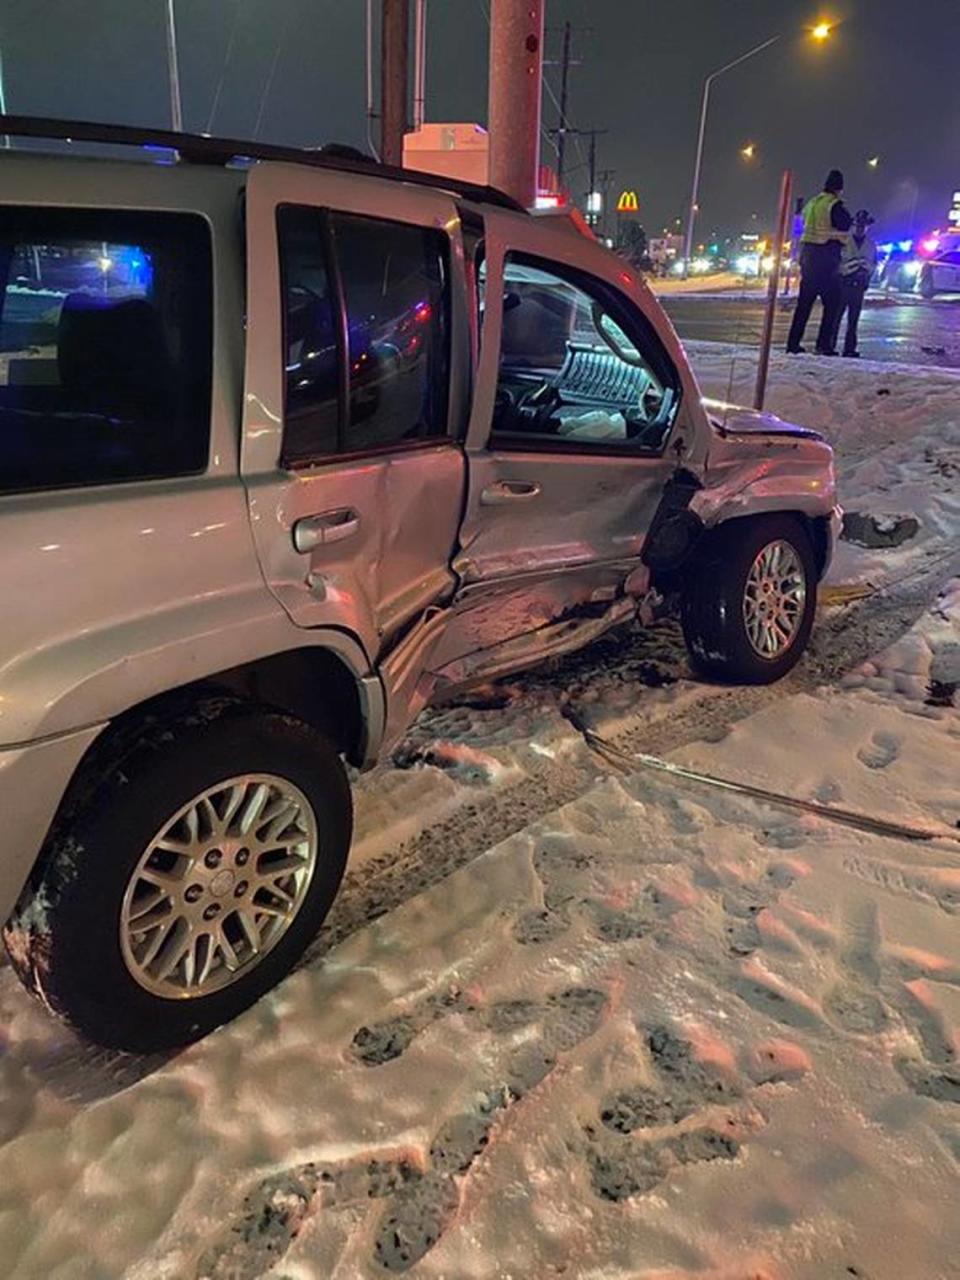 A Thursday snow storm hit in time for the commute home in the Tri-Cities. It led to more than 50 crashes on state highways and interstates in the